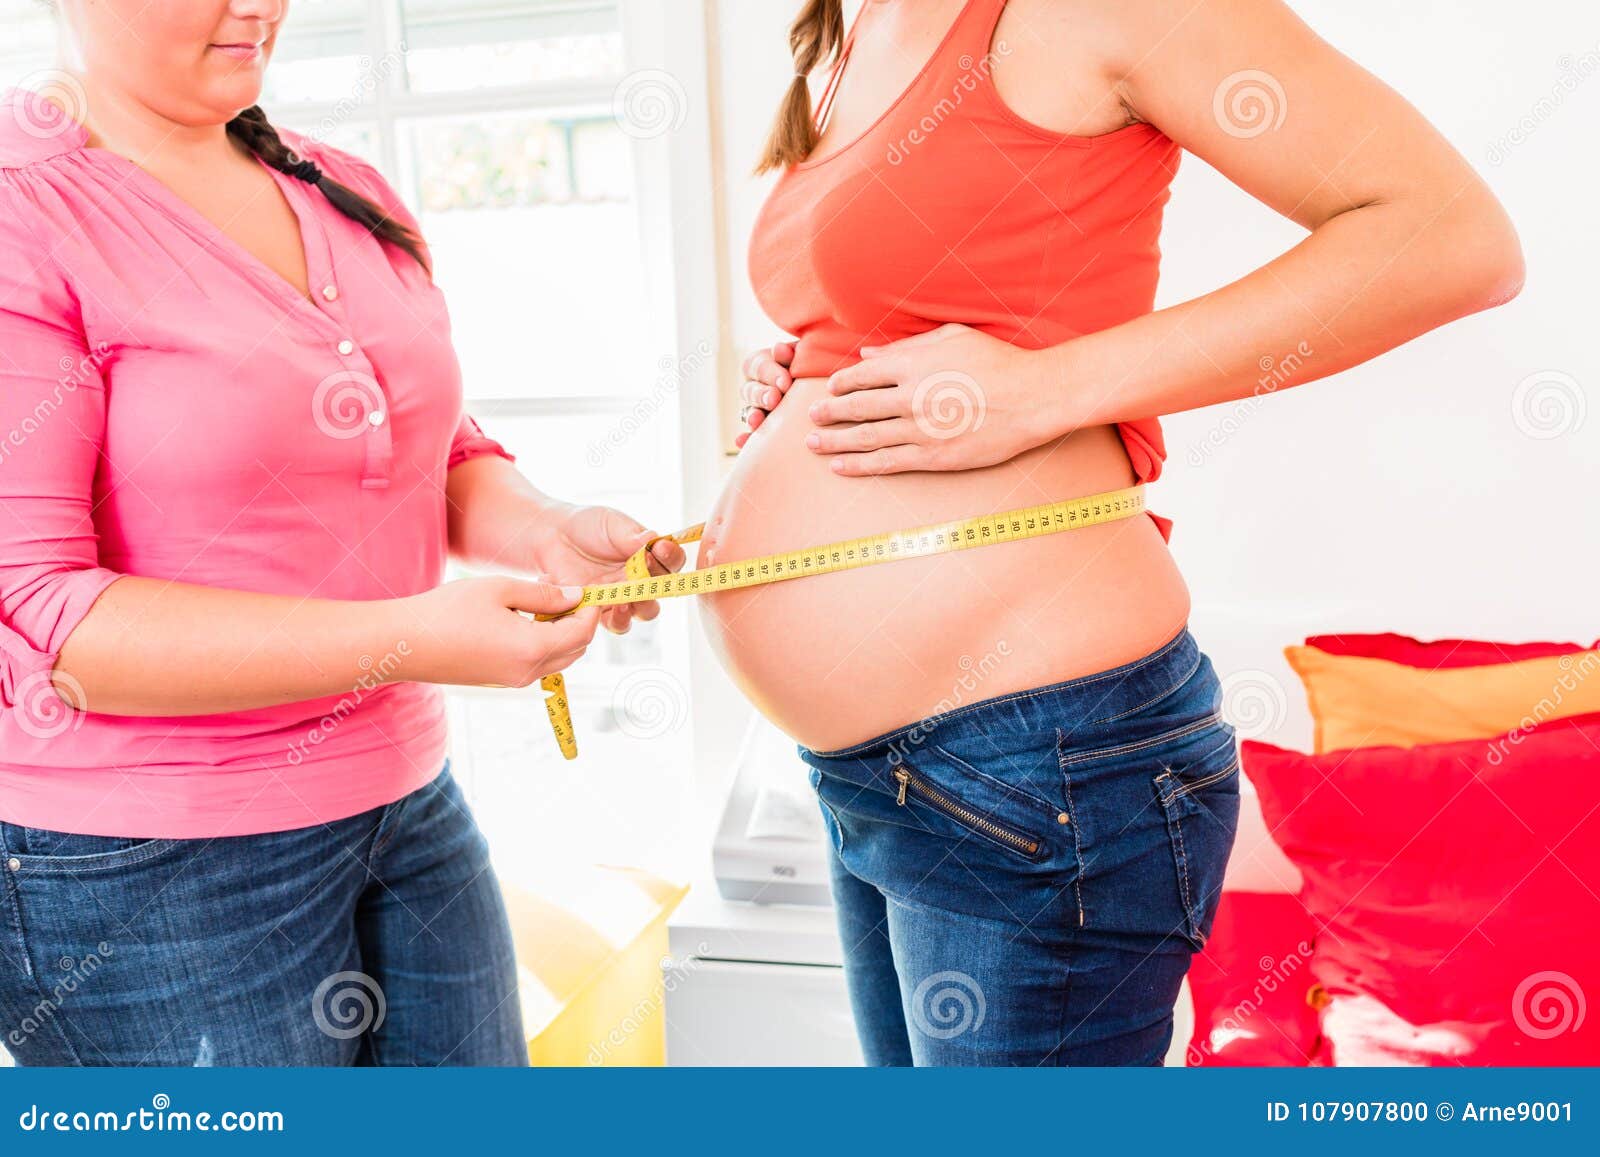 standing pregnant women and midwife measuring circumference of b